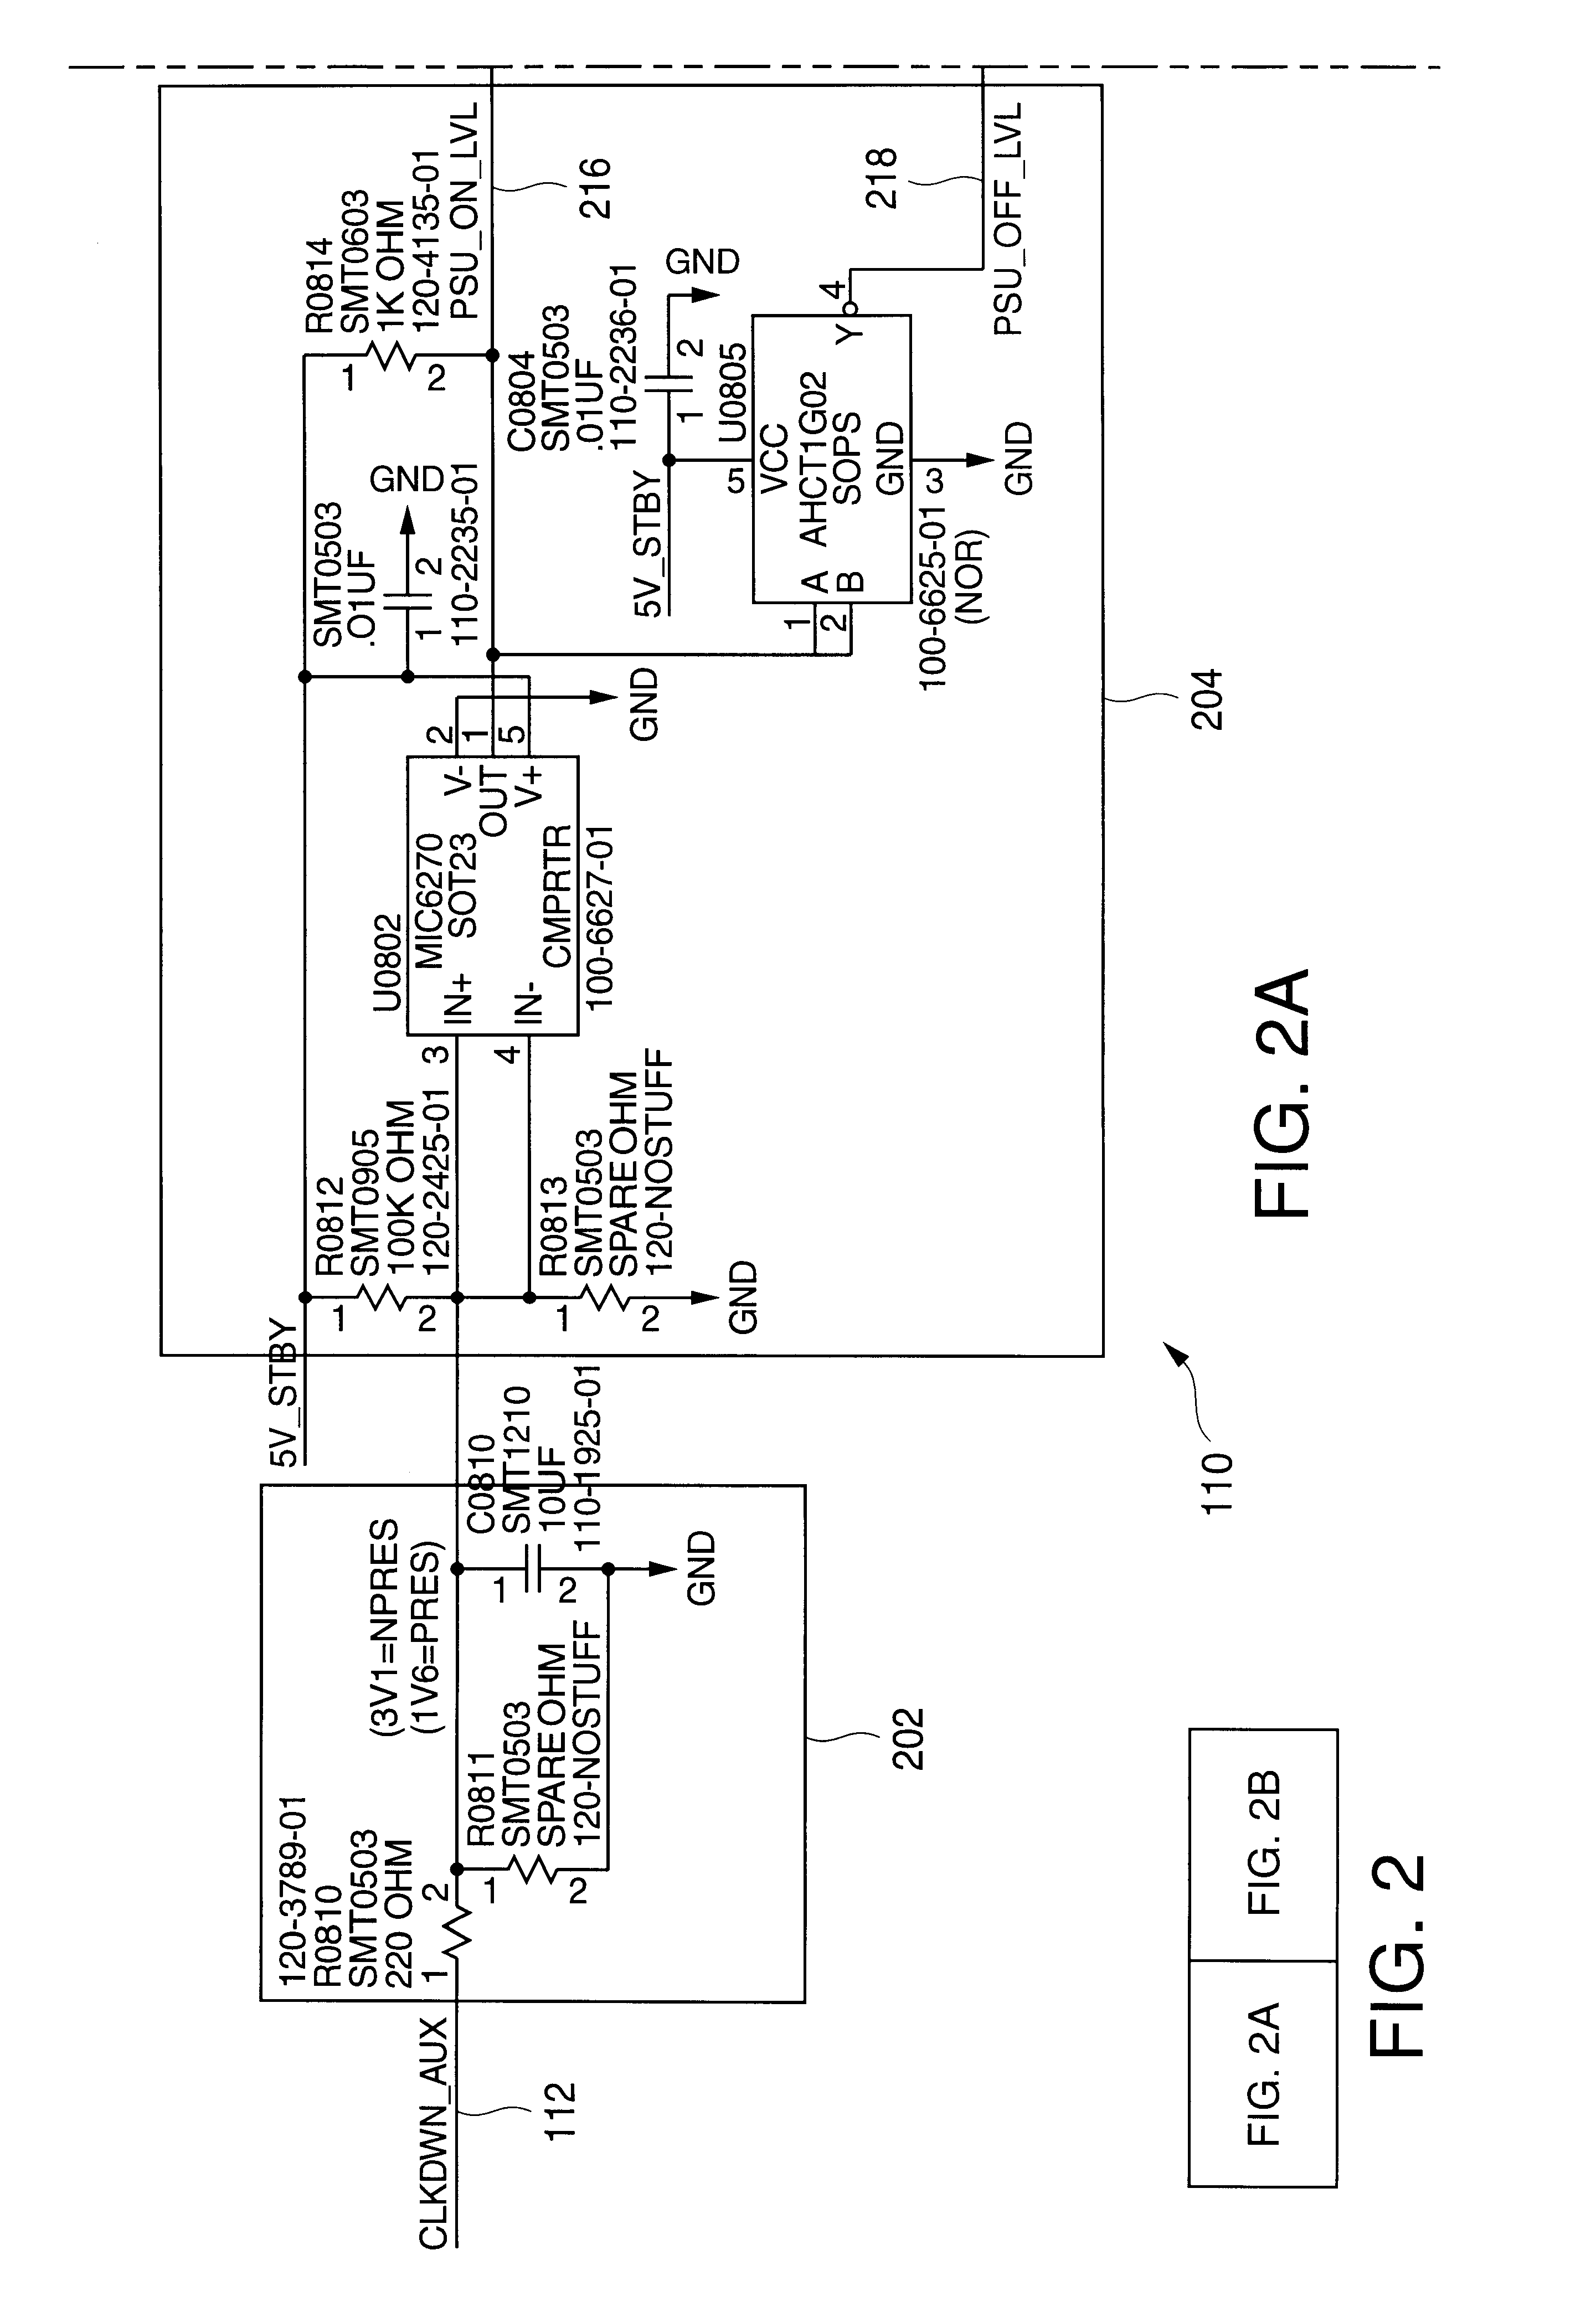 System for remotely controlling power cycling of a peripheral expansion subsystem by a host